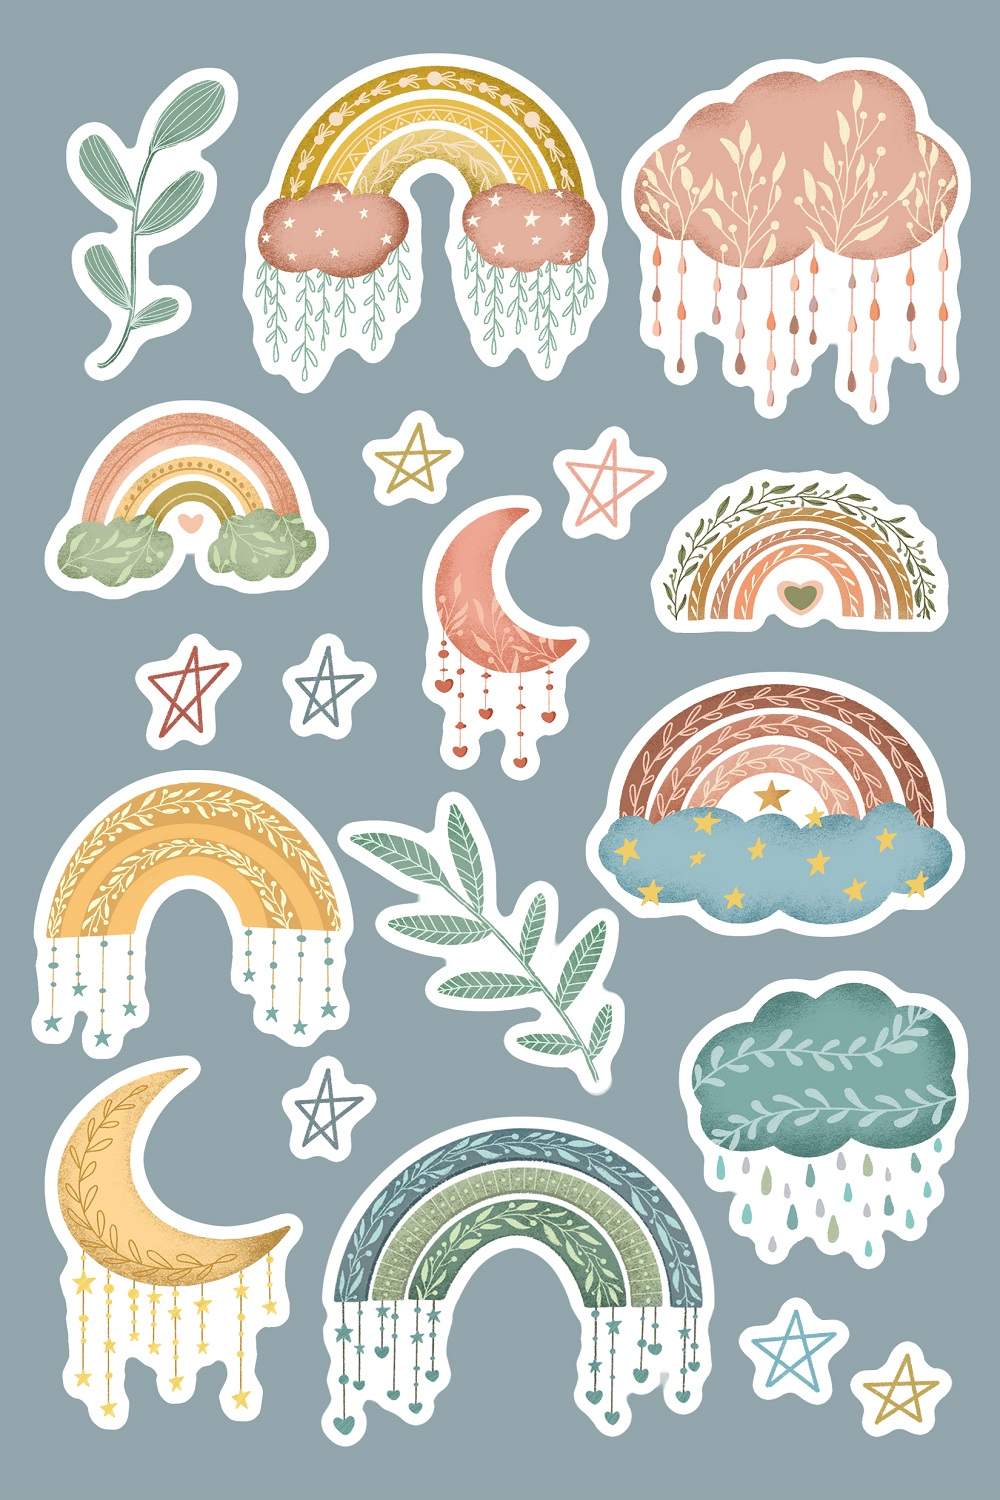 Rainbow sticker pack pinterest preview image.